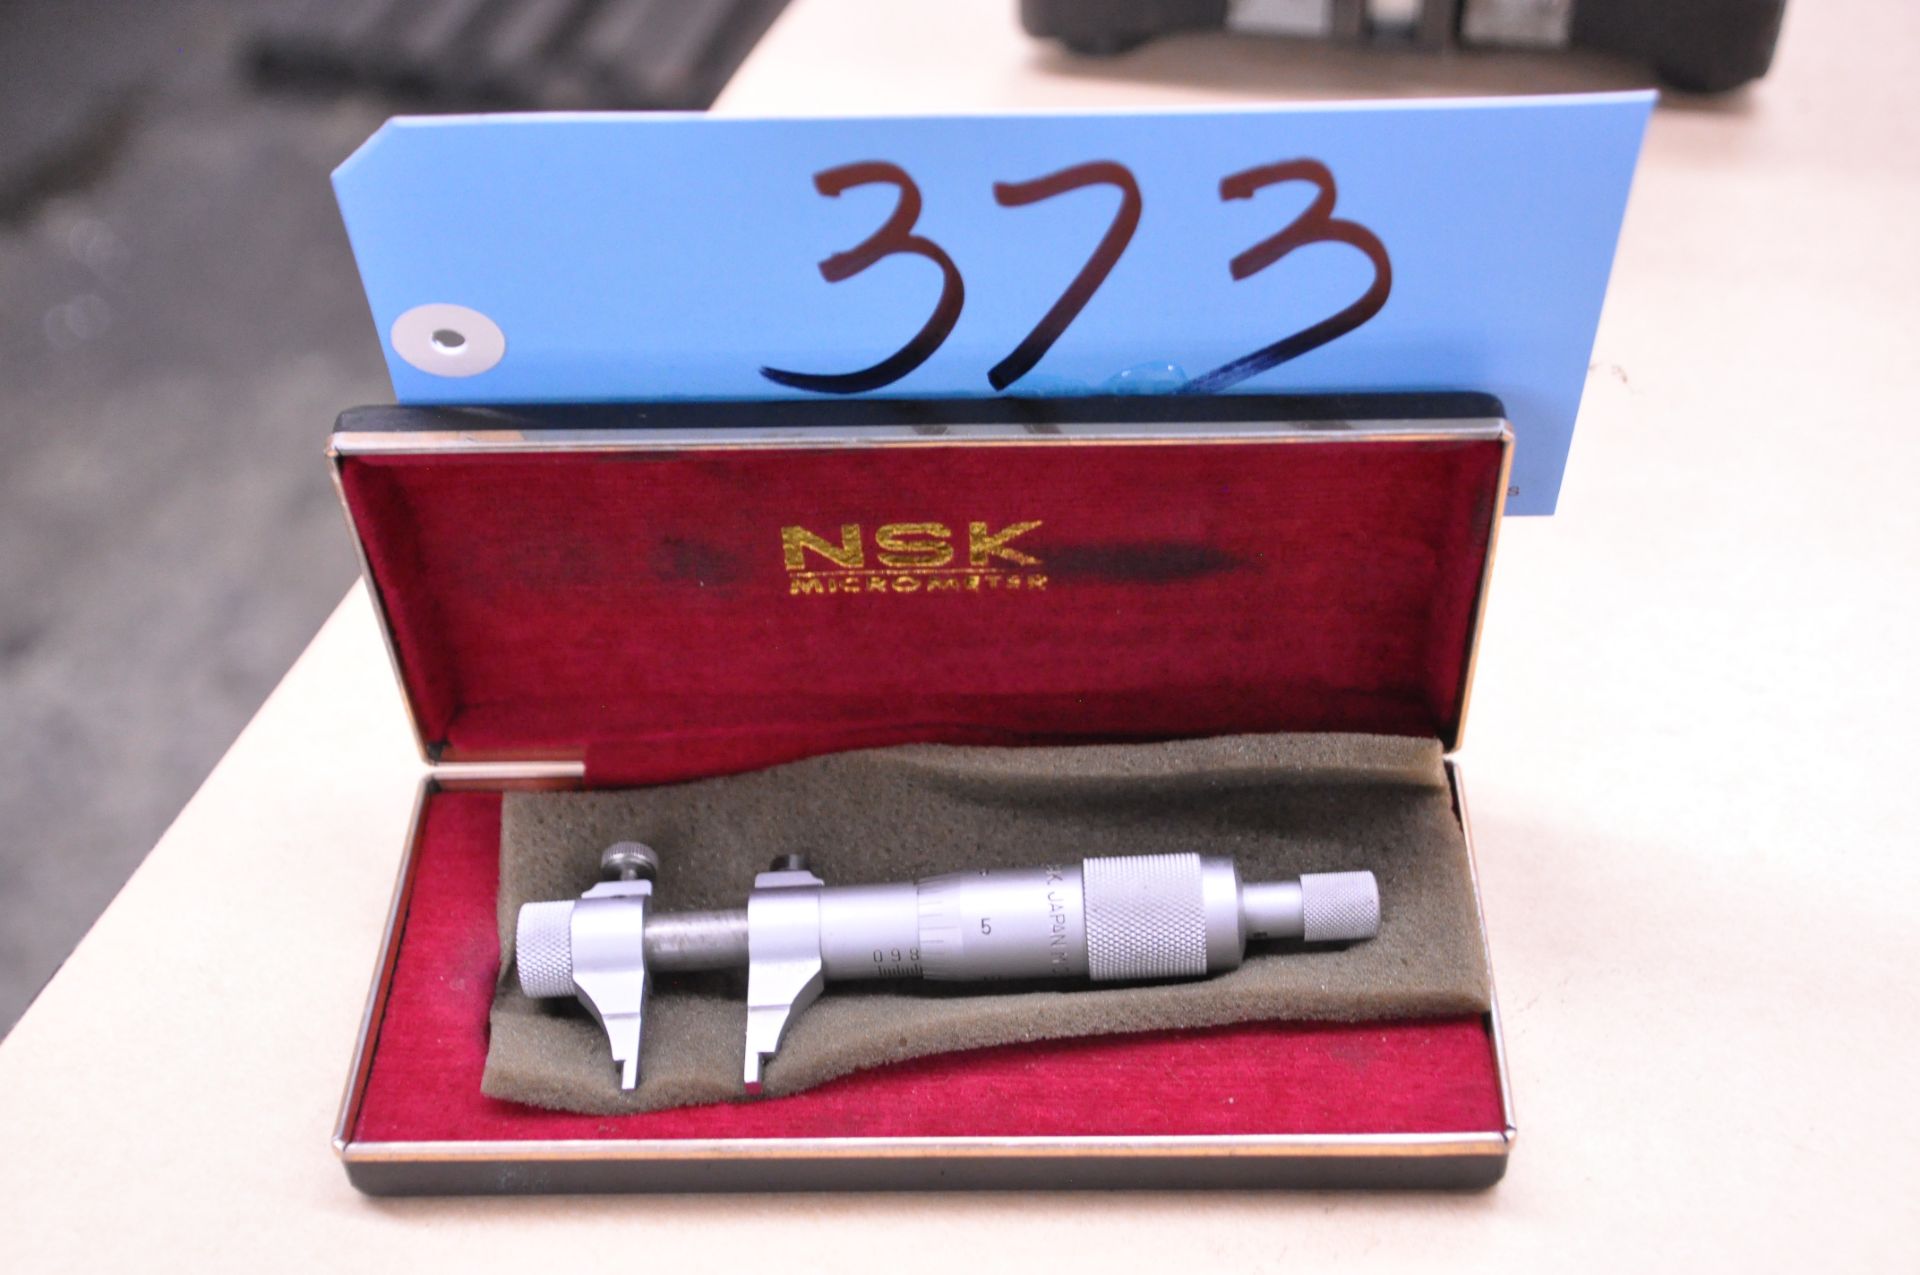 NSK Inside Micrometer with Case